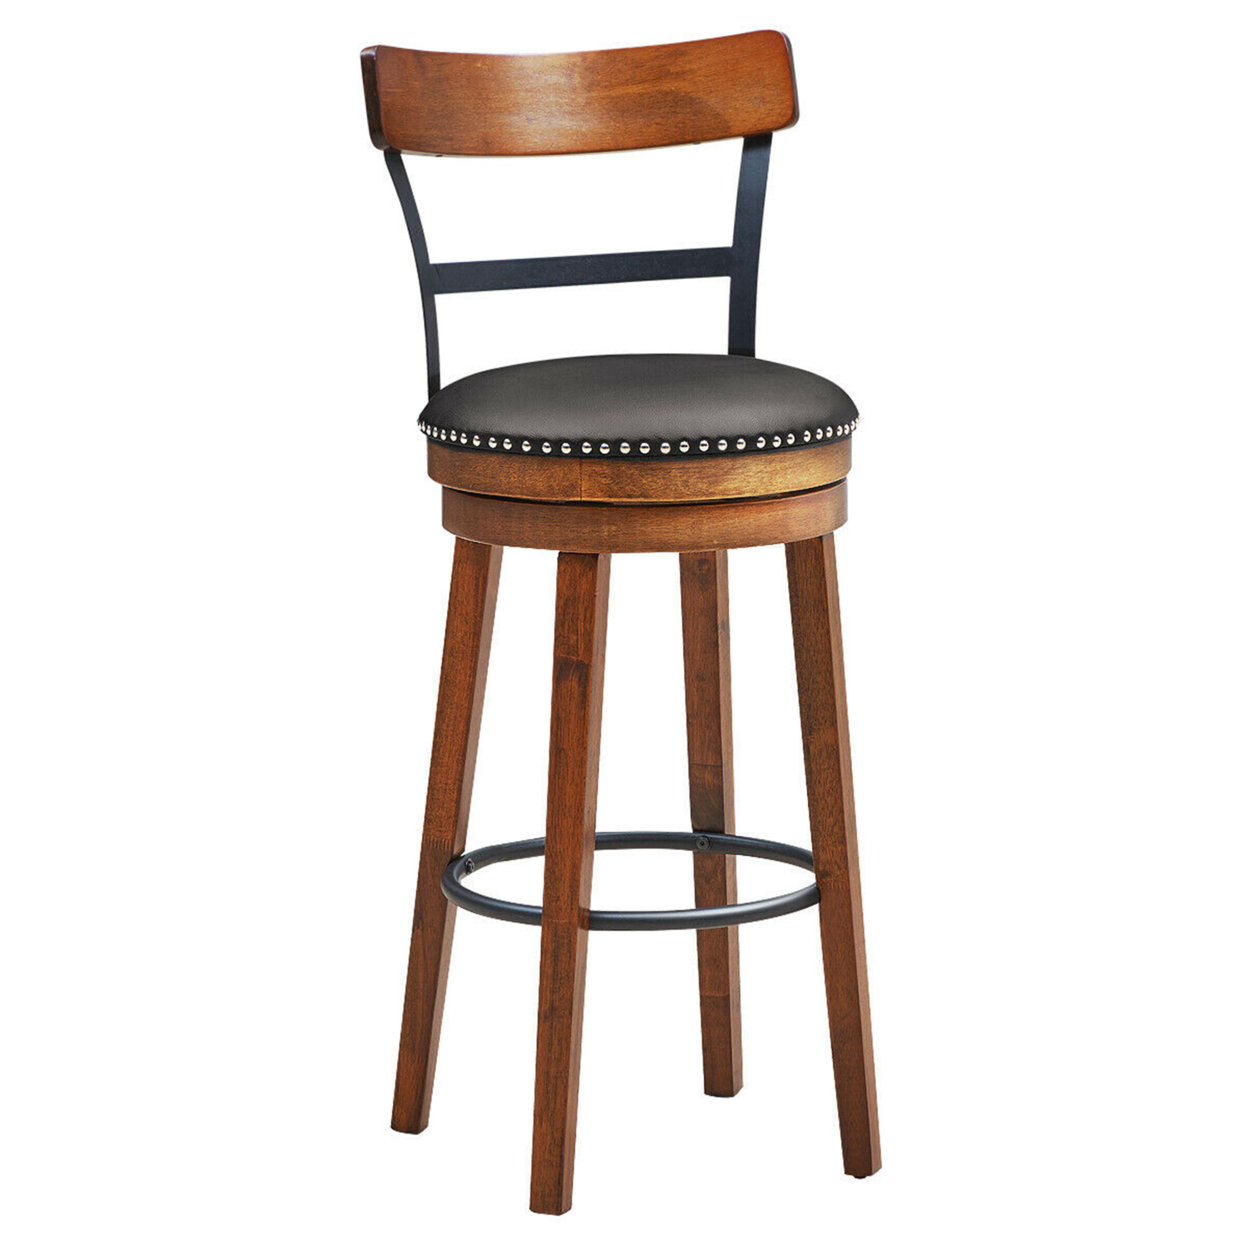 30.5'' BarStool Swivel Pub Height Kitchen Dining Bar Chair With Rubber Wood Legs